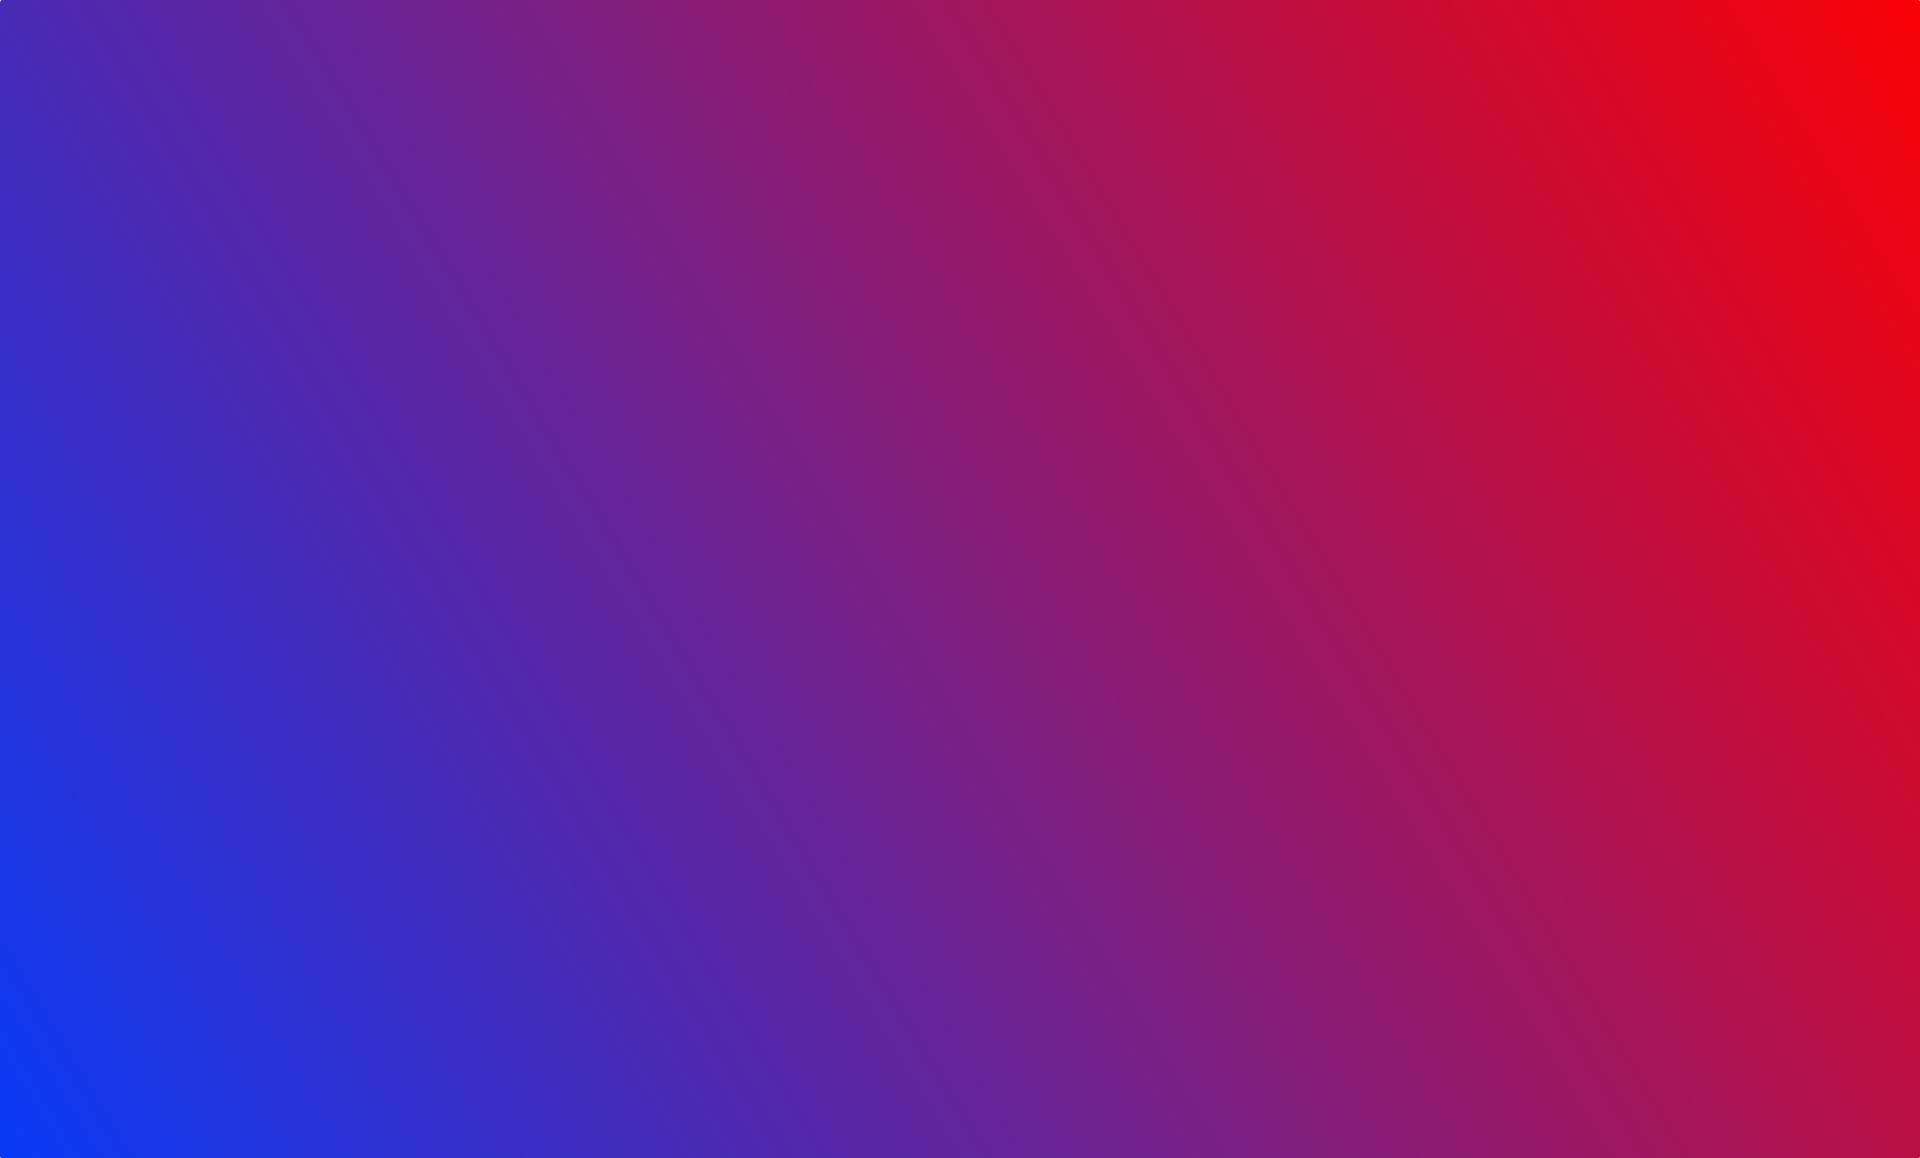 blue and red color gradient background free vector